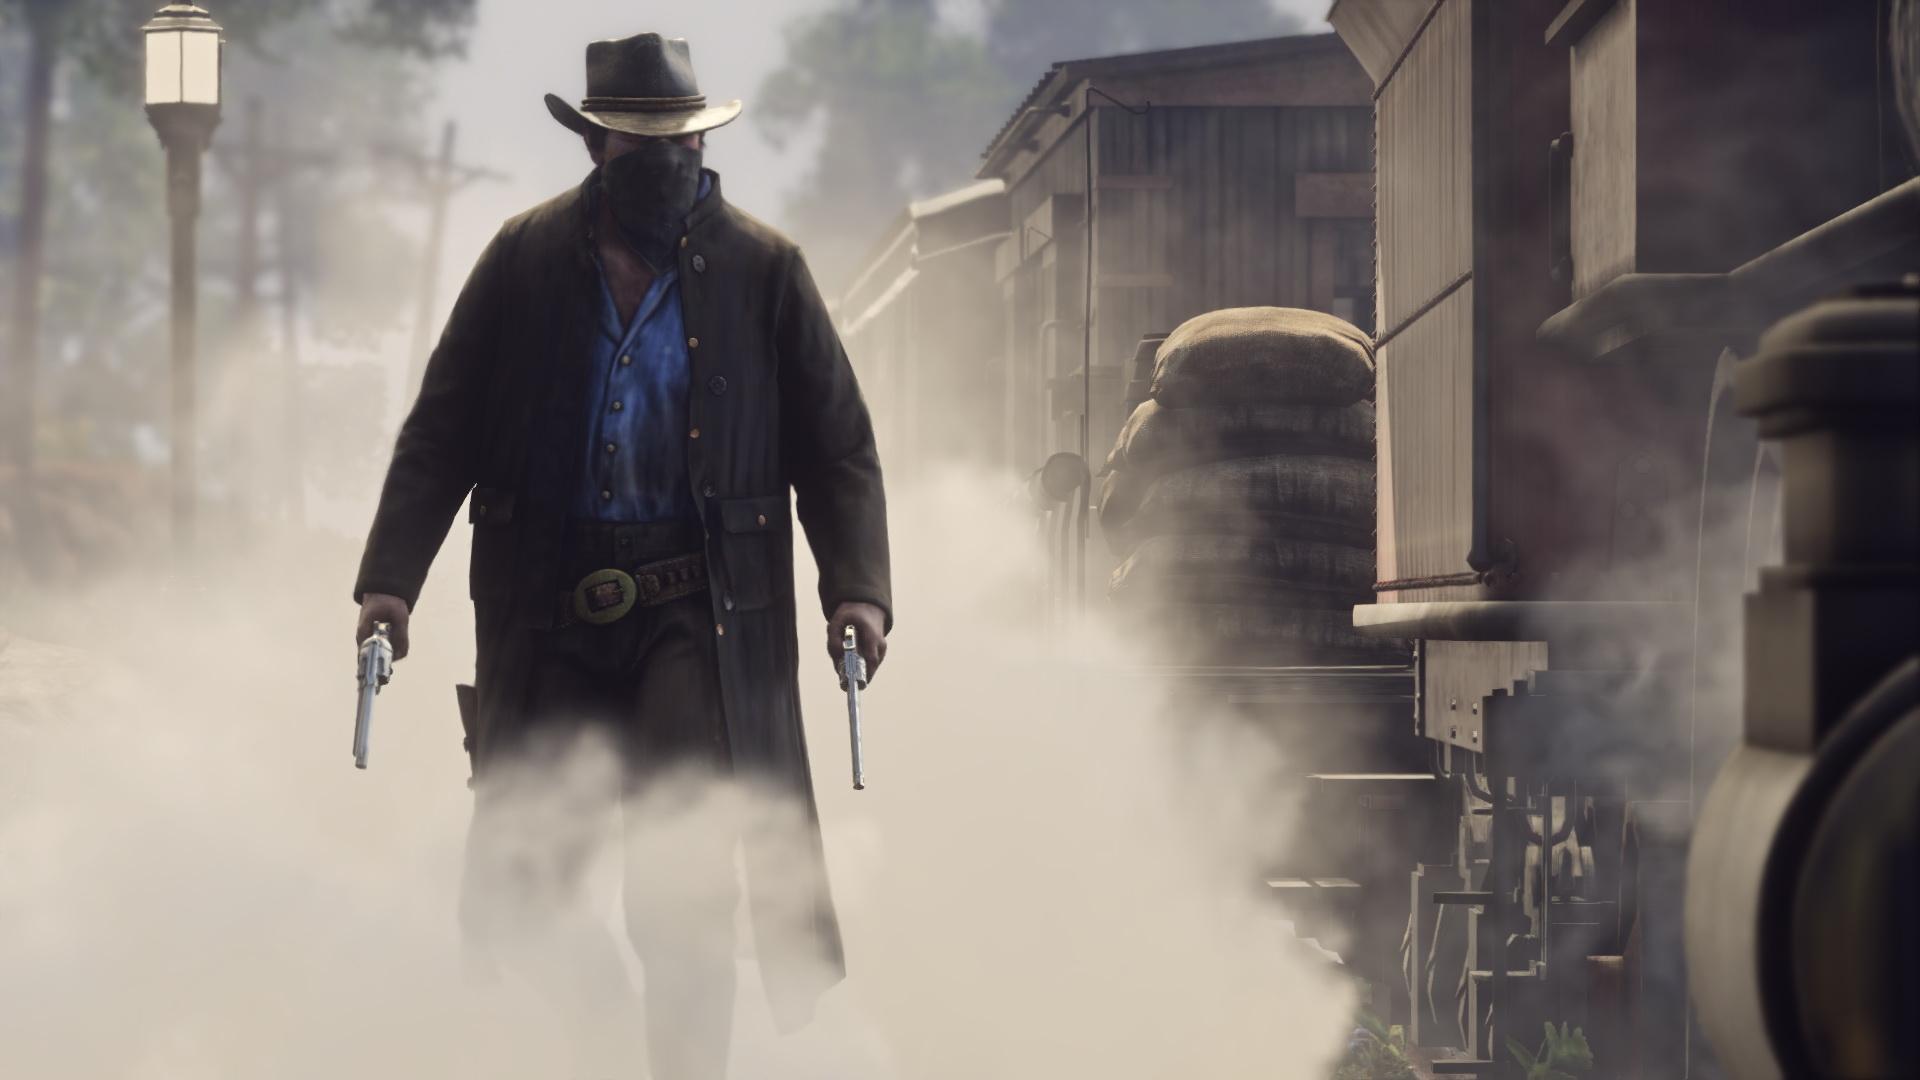 Red Dead Redemption 2 and What the Latest Shows About Our